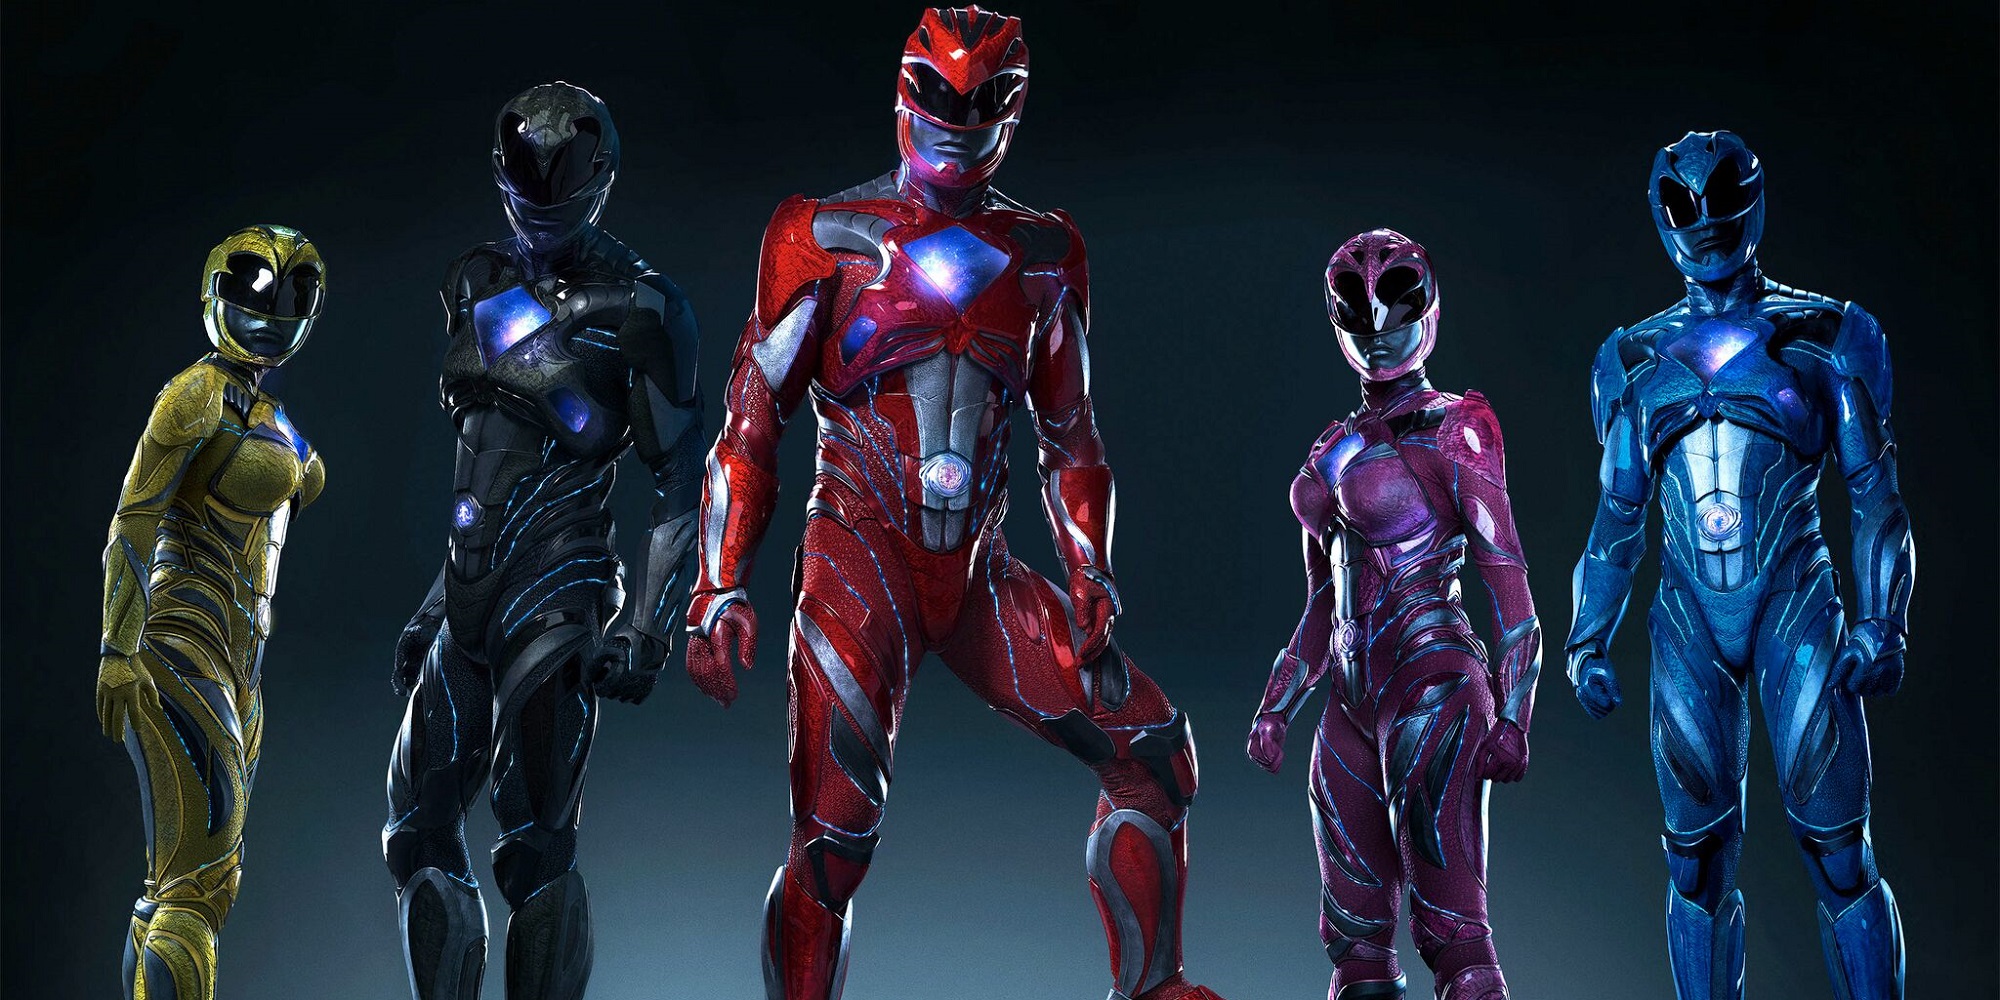 The New Power Rangers Movie Trailer Is Officially Out